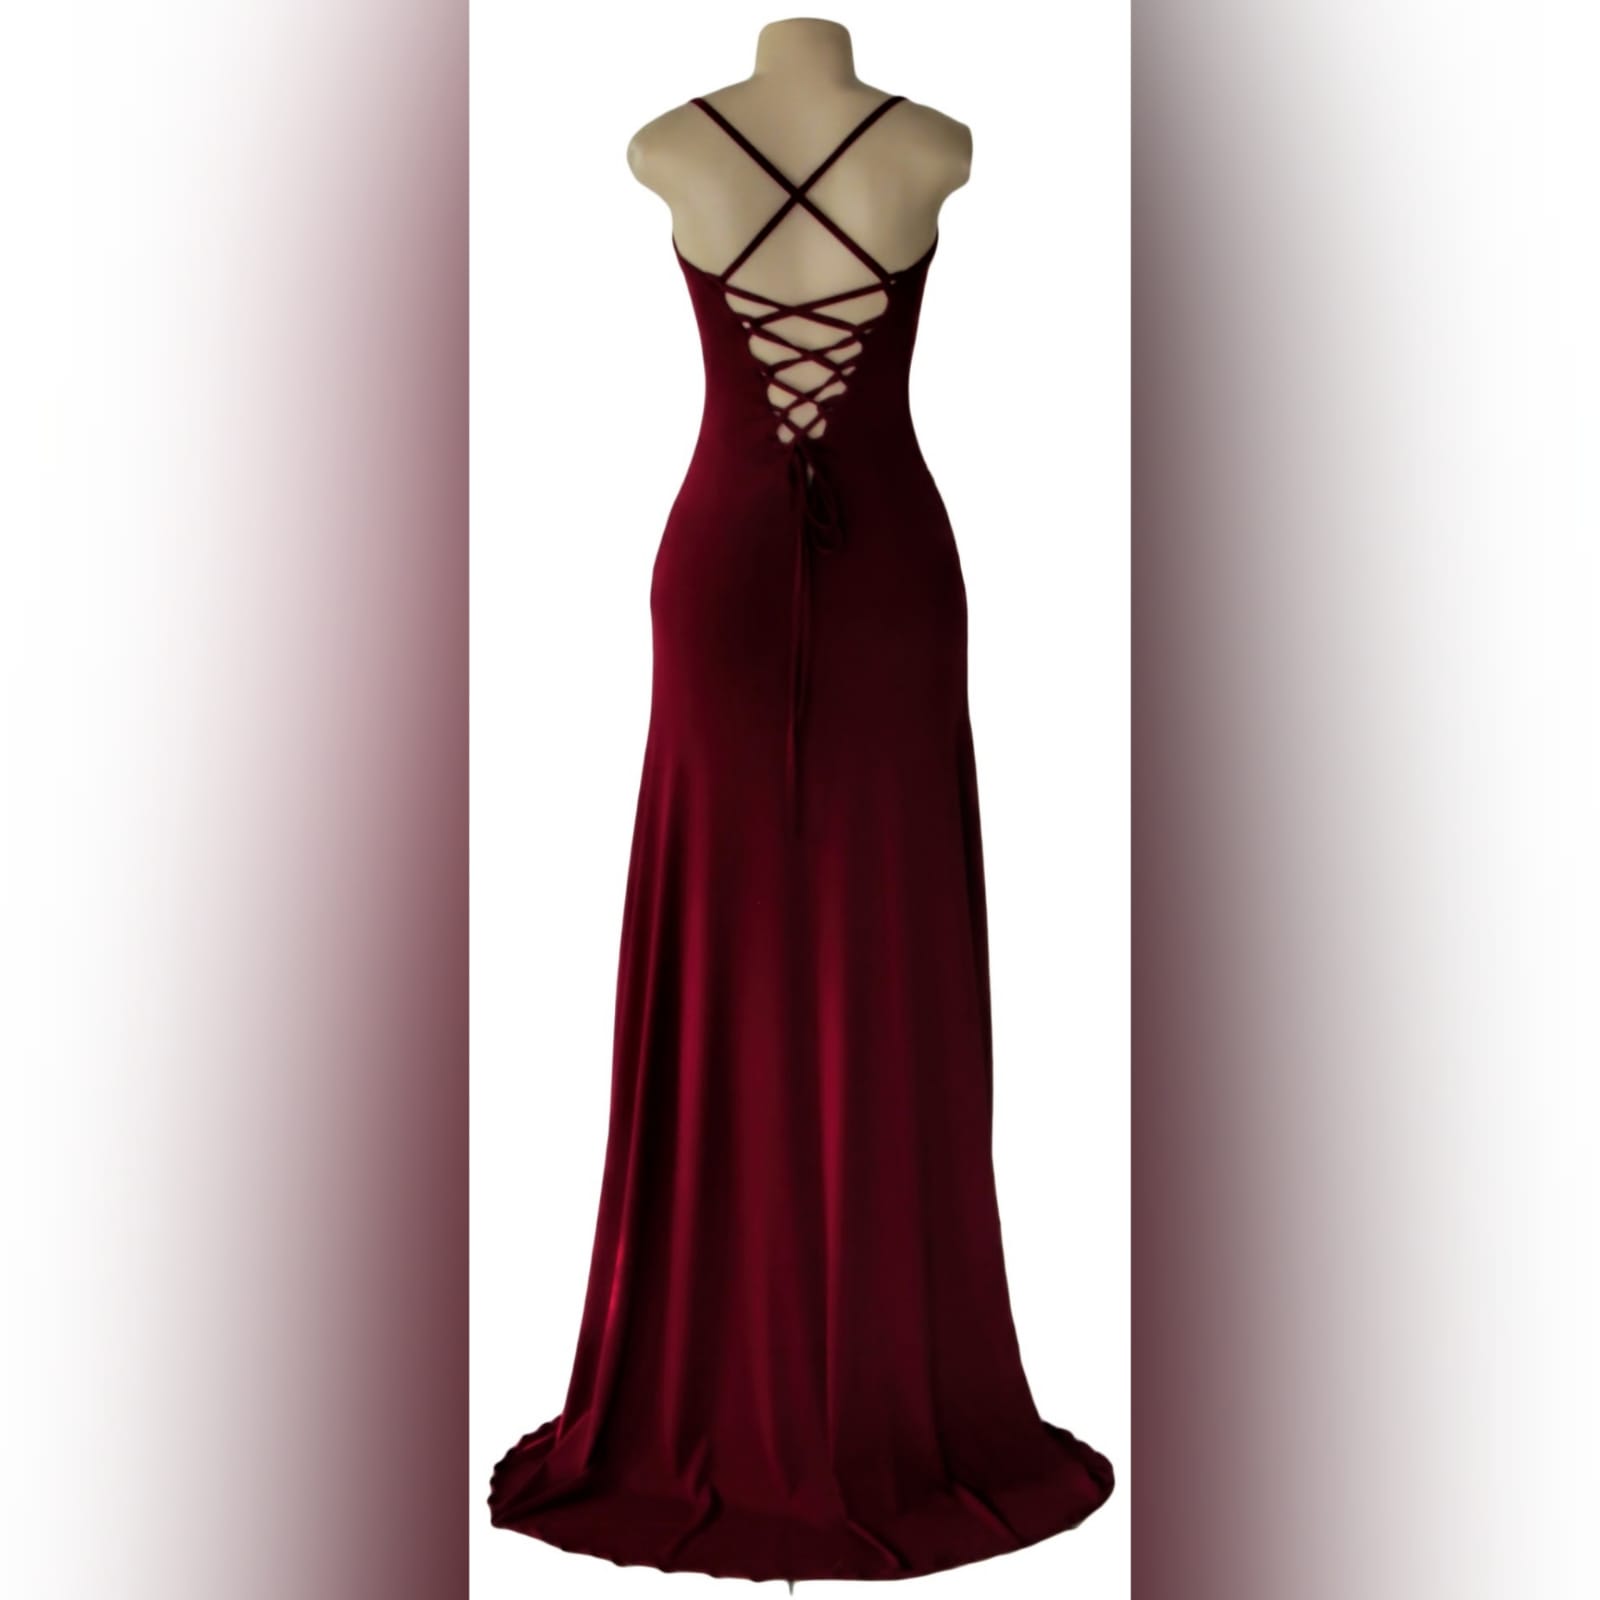 Maroon lace-up back long simple matric dance dress 3 maroon lace-up back long simple matric dance dress with thin shoulder straps, high slit and a small train. Lace-up back to adjust the fit.